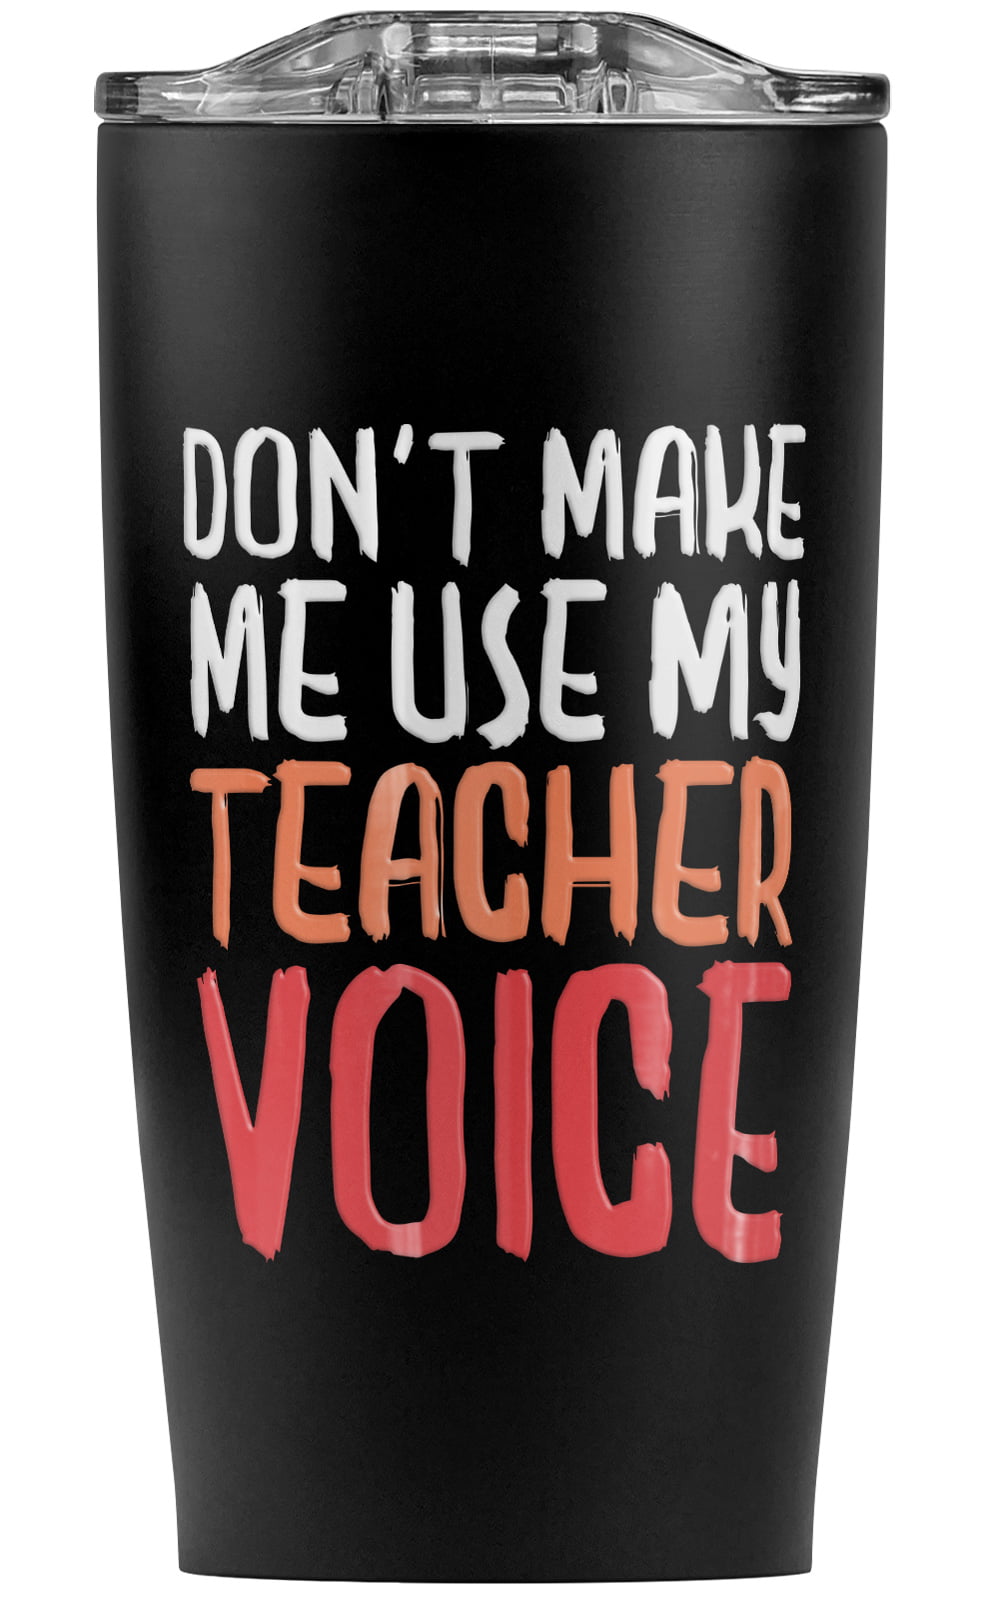 DON'T MAKE ME USE MY TEACHER VOICE vintage looking metal sign 8 x 12 